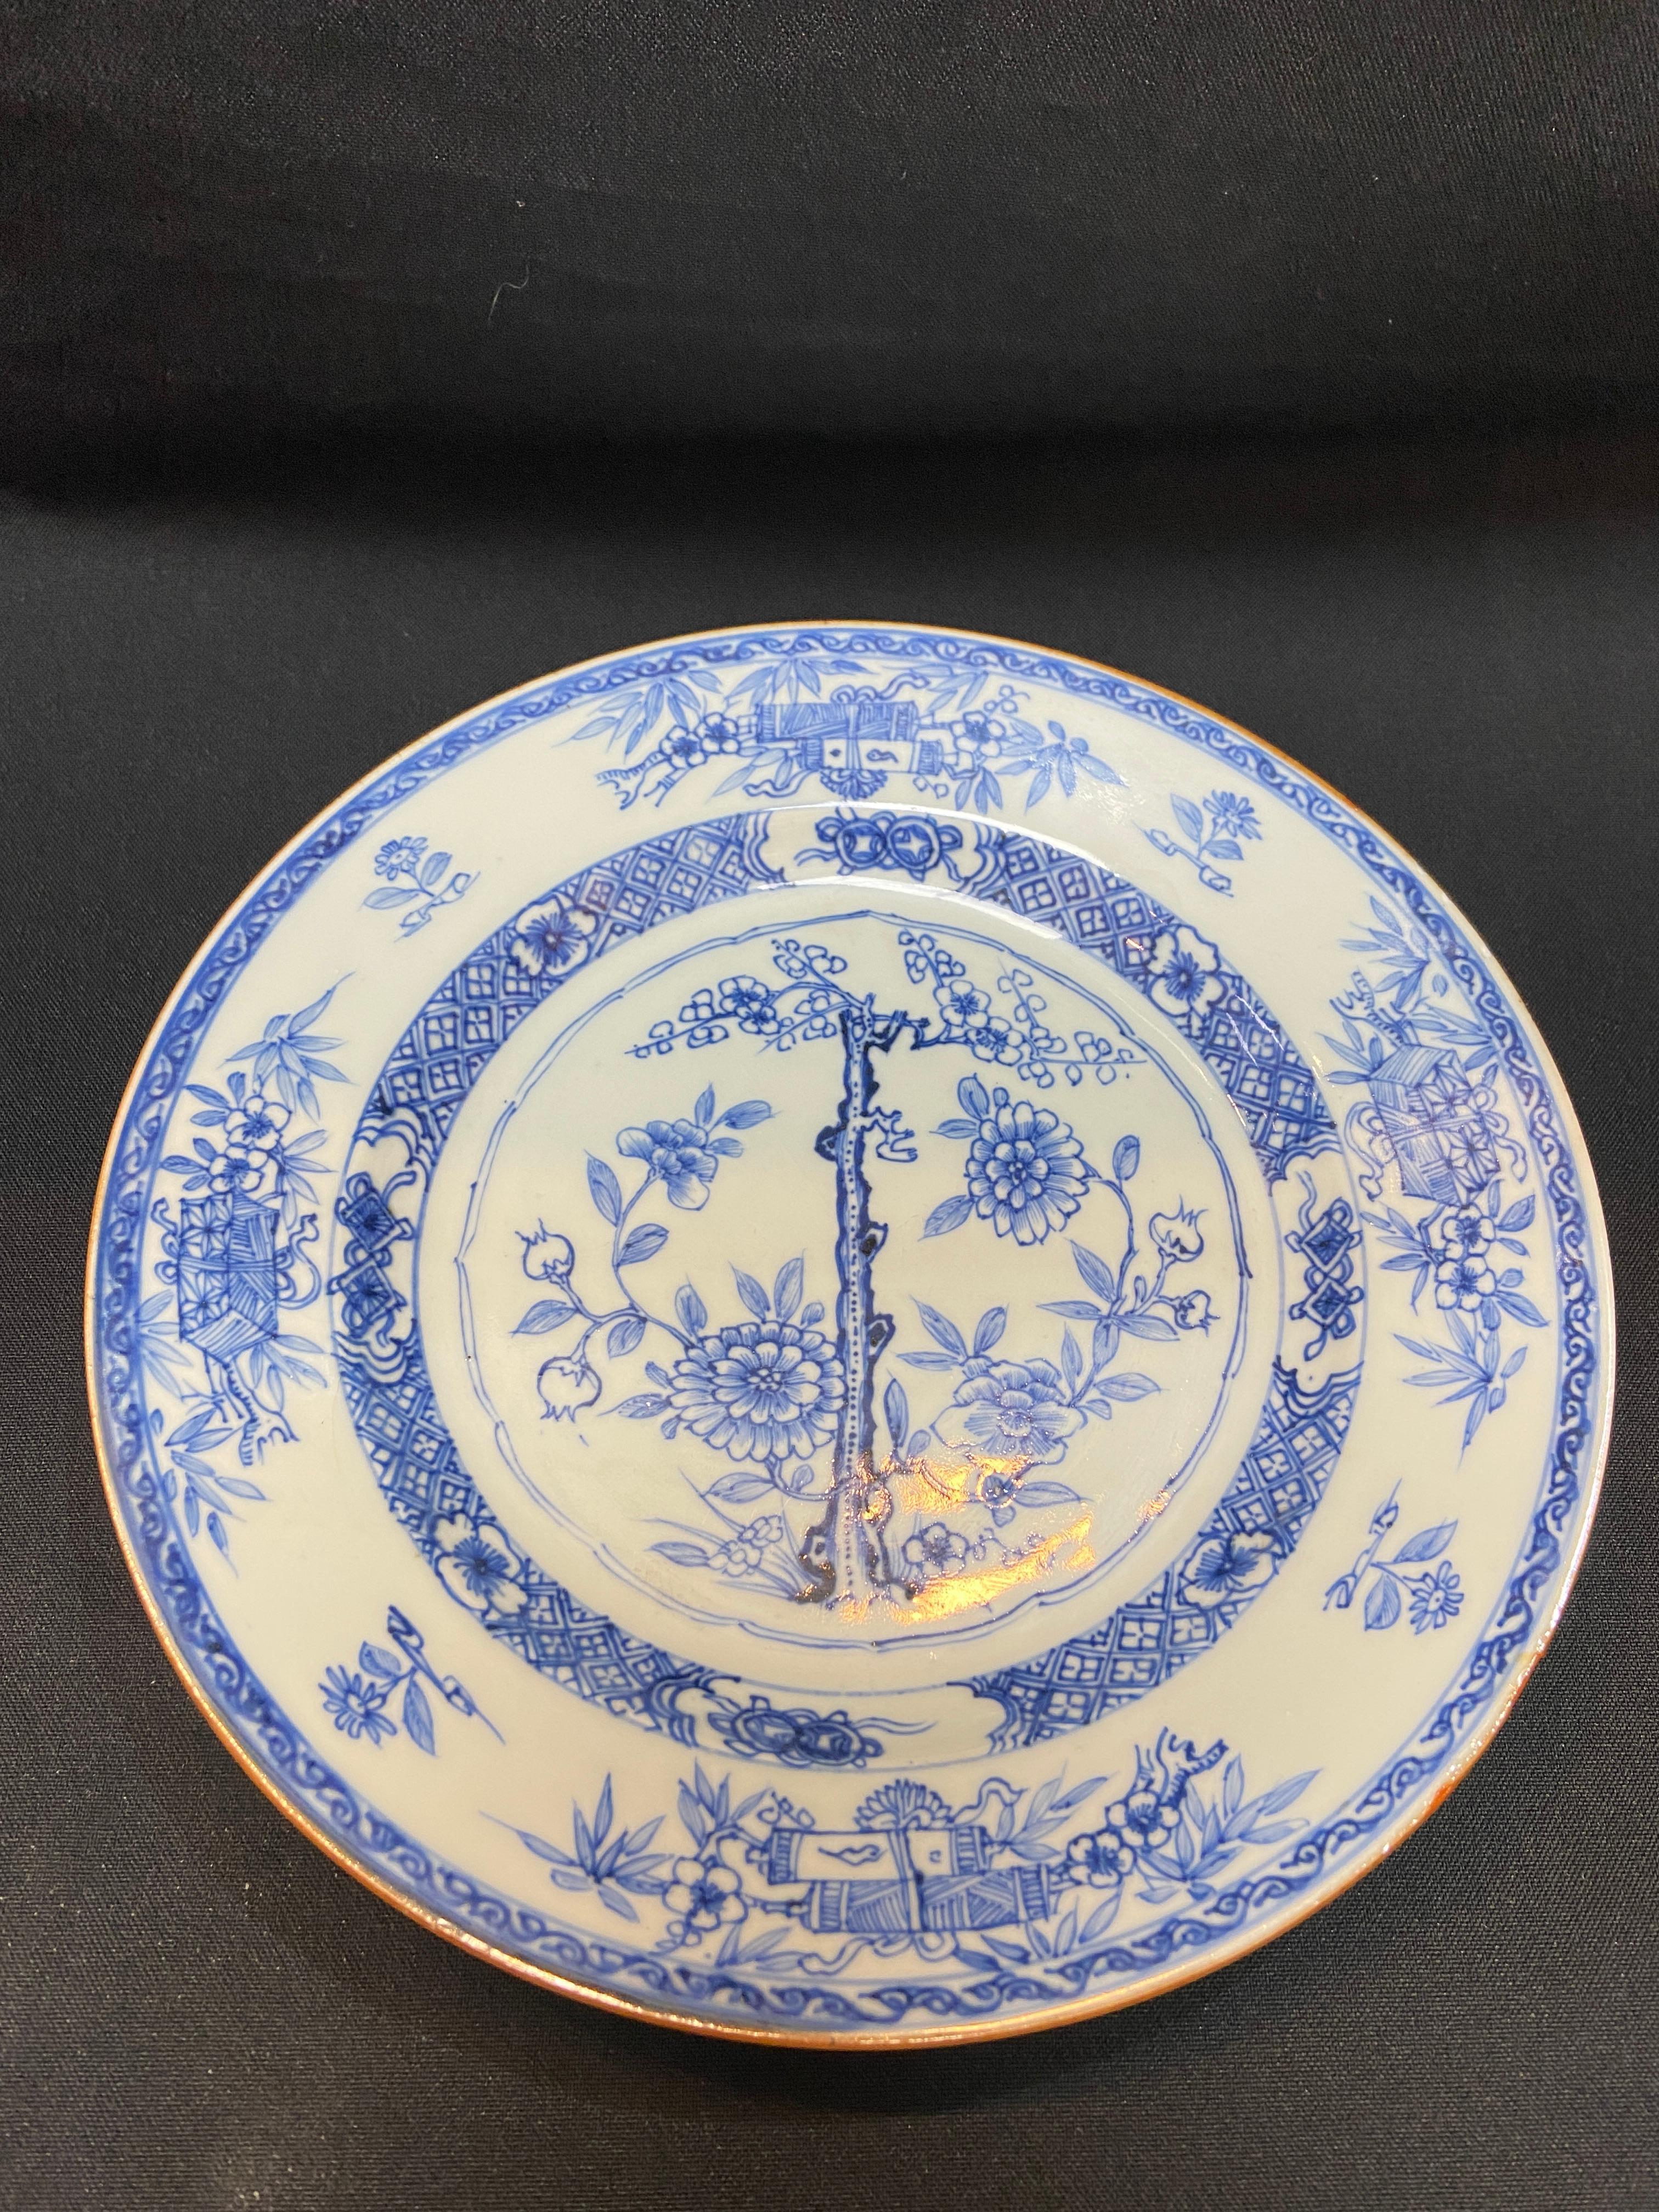 Qing， Qianlong Period blue and white “Flowers” dish/ 清， 乾隆 青花花卉图盘（口沿小飞皮）18th century
Condition：Shows normal sign of wear and use，Please notice a small spot around the rim has tiny crack. Please refer the size and condition in the photos above.